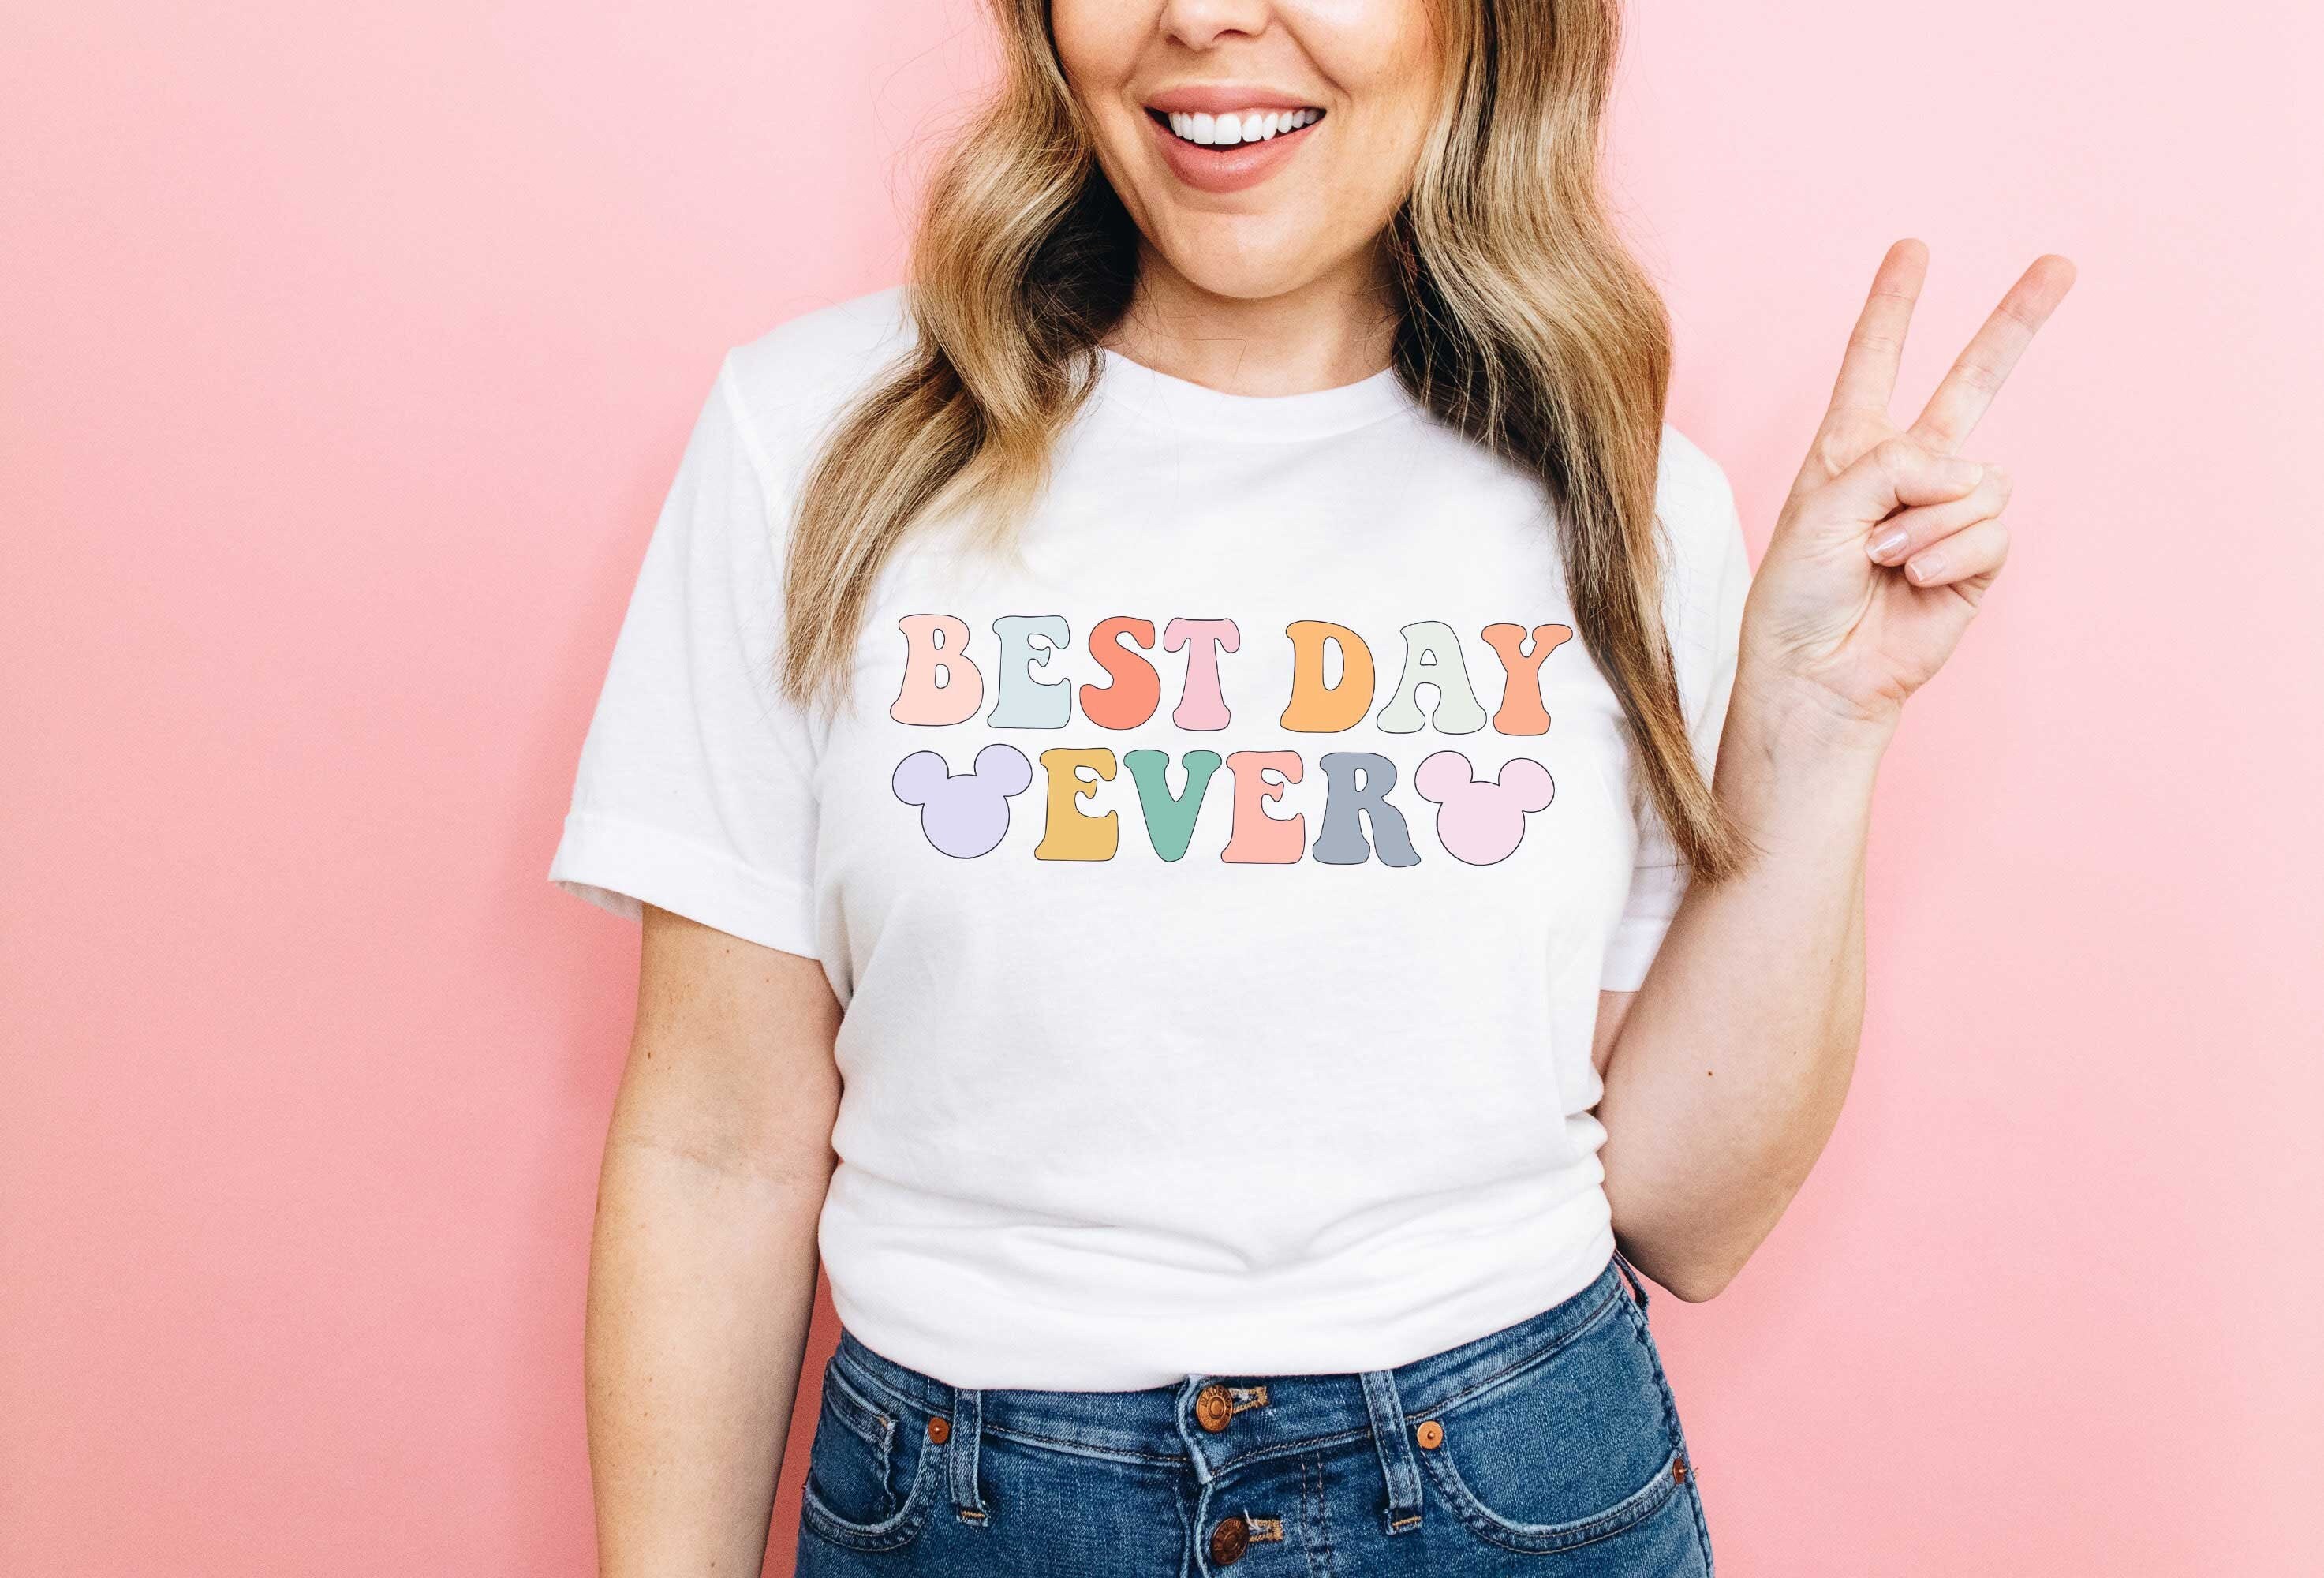 Best Day Ever Shirt, Happiest Place On Earth Shirt,The Most Magical Place On Earth Shirts